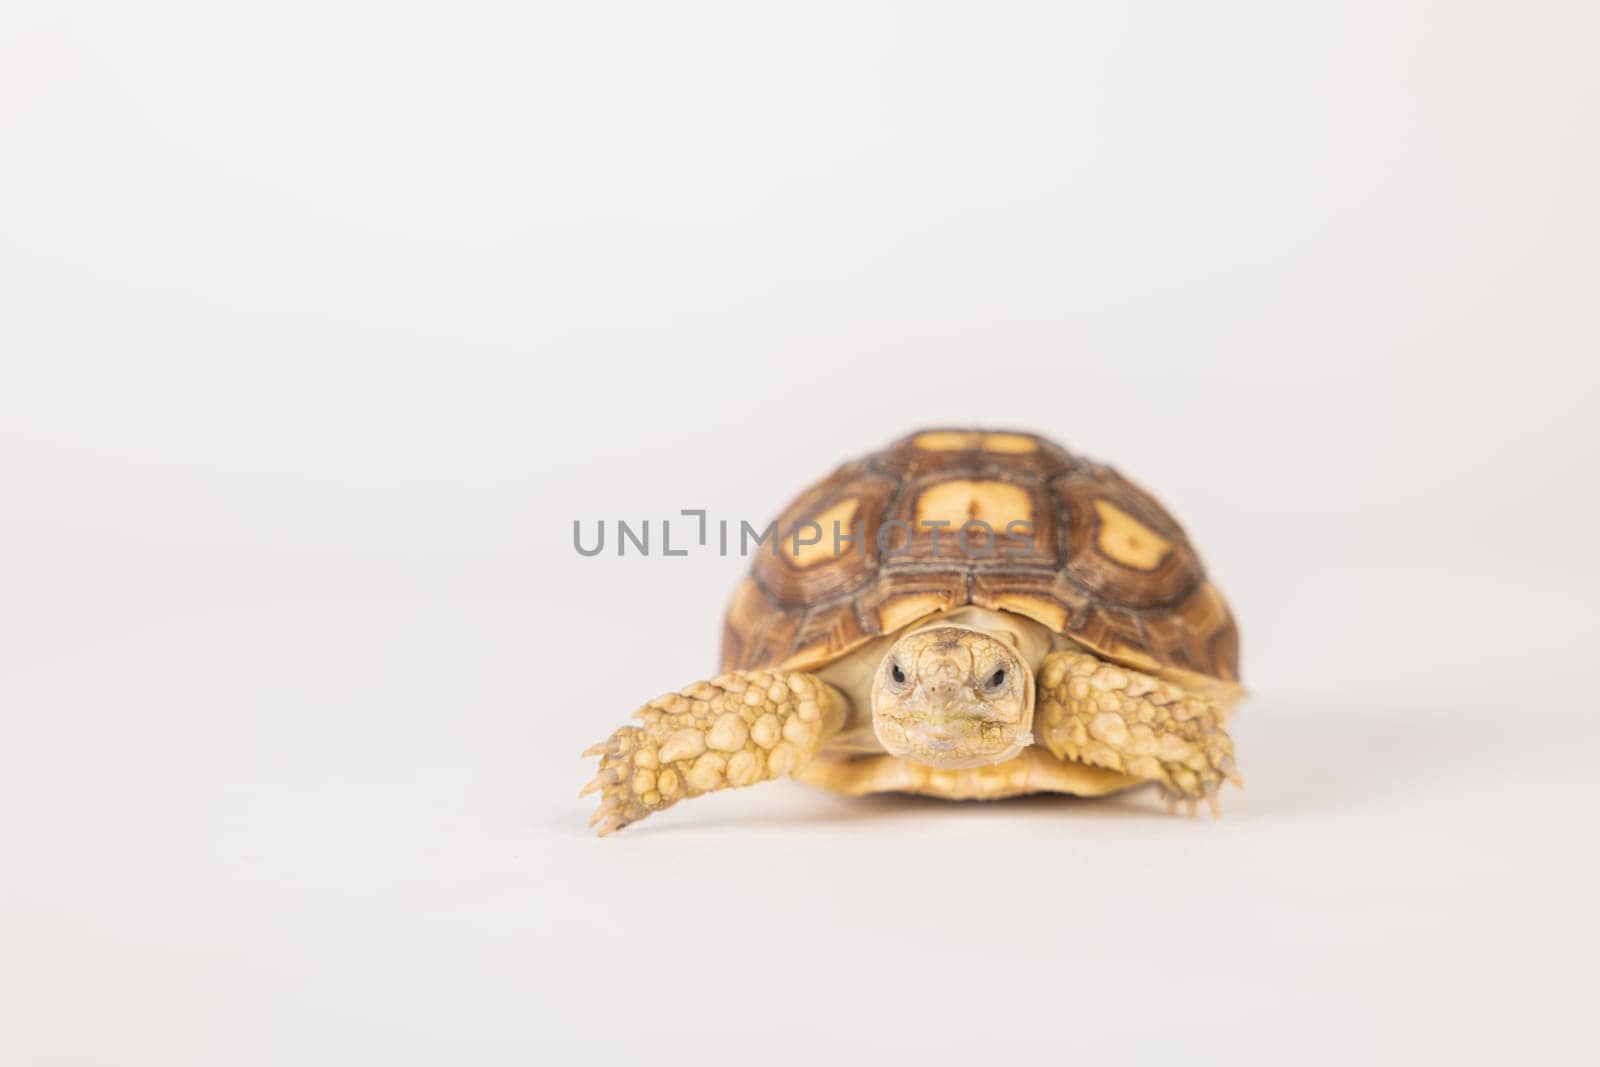 An isolated portrait of a little African spurred tortoise, also known as the sulcata tortoise, against a white background. This adorable reptile showcases the beauty of nature's design.